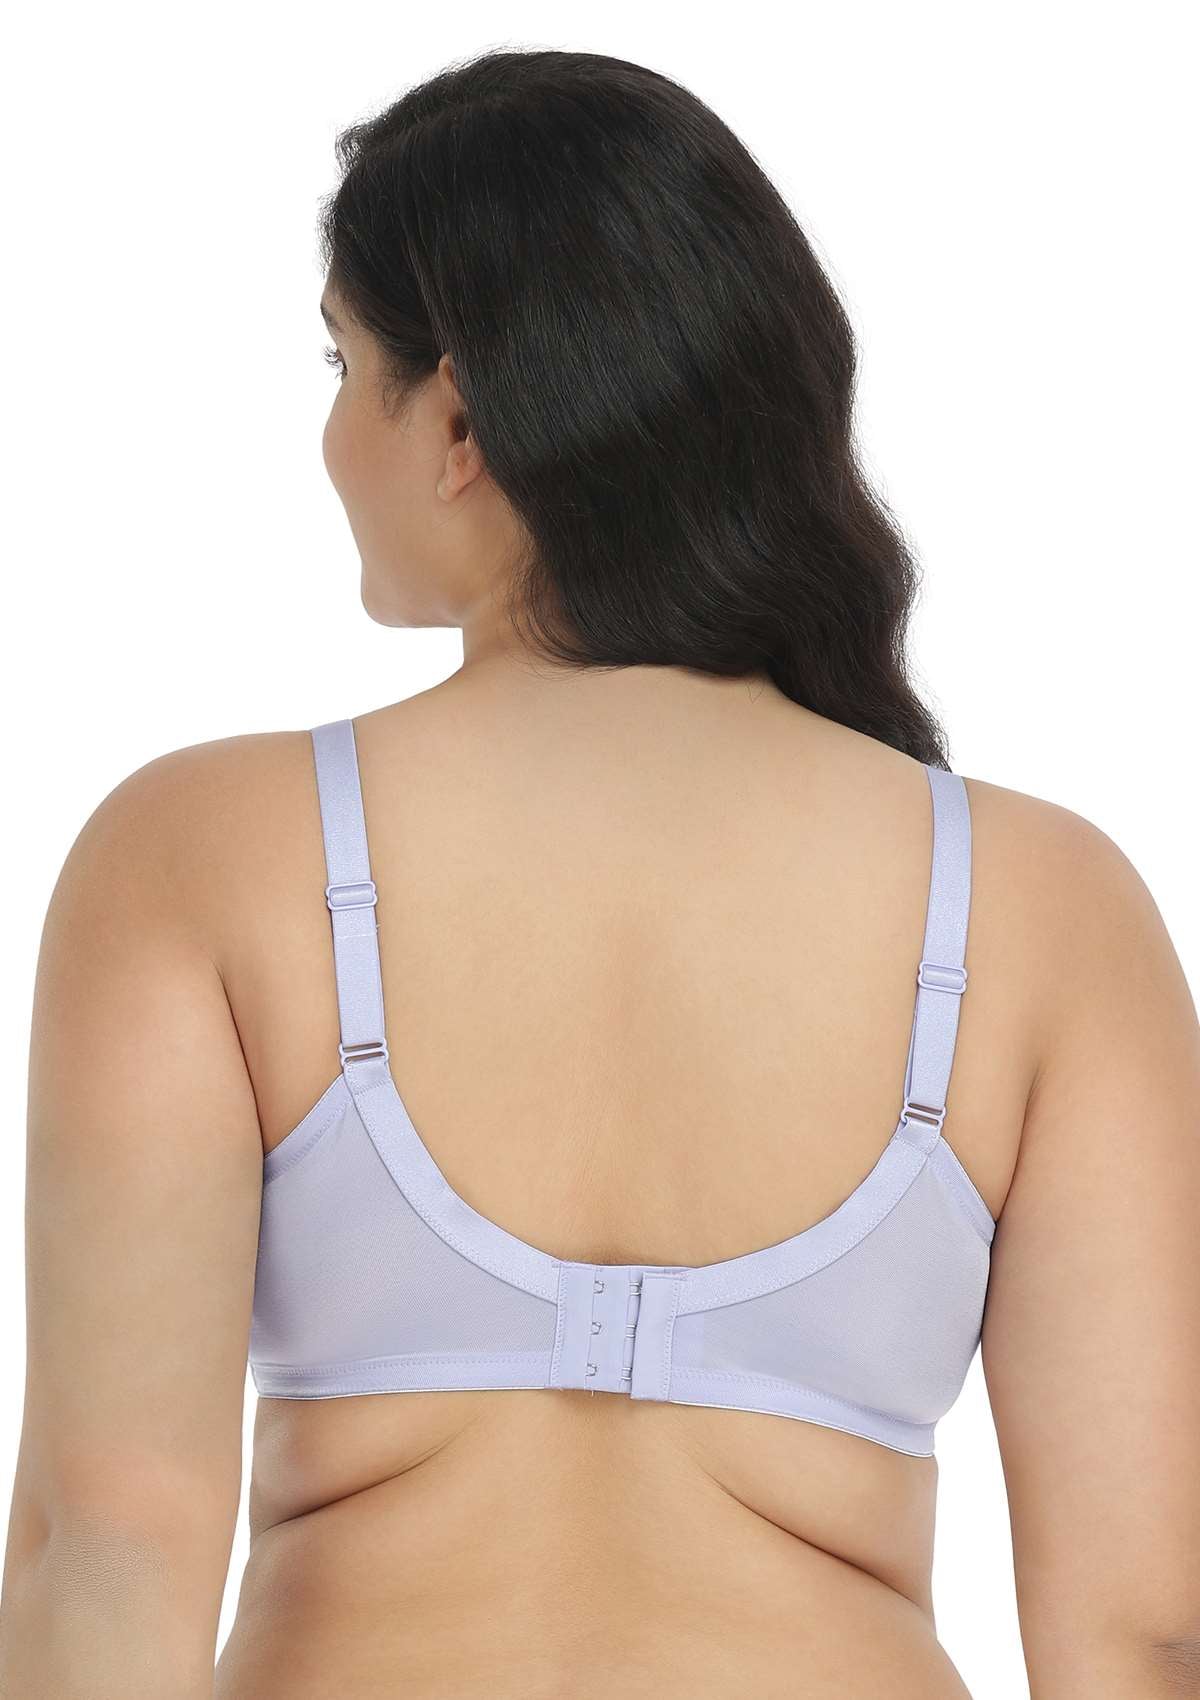 HSIA Wisteria Bra For Lift And Support - Full Coverage Minimizer Bra - Light Pink / 38 / C